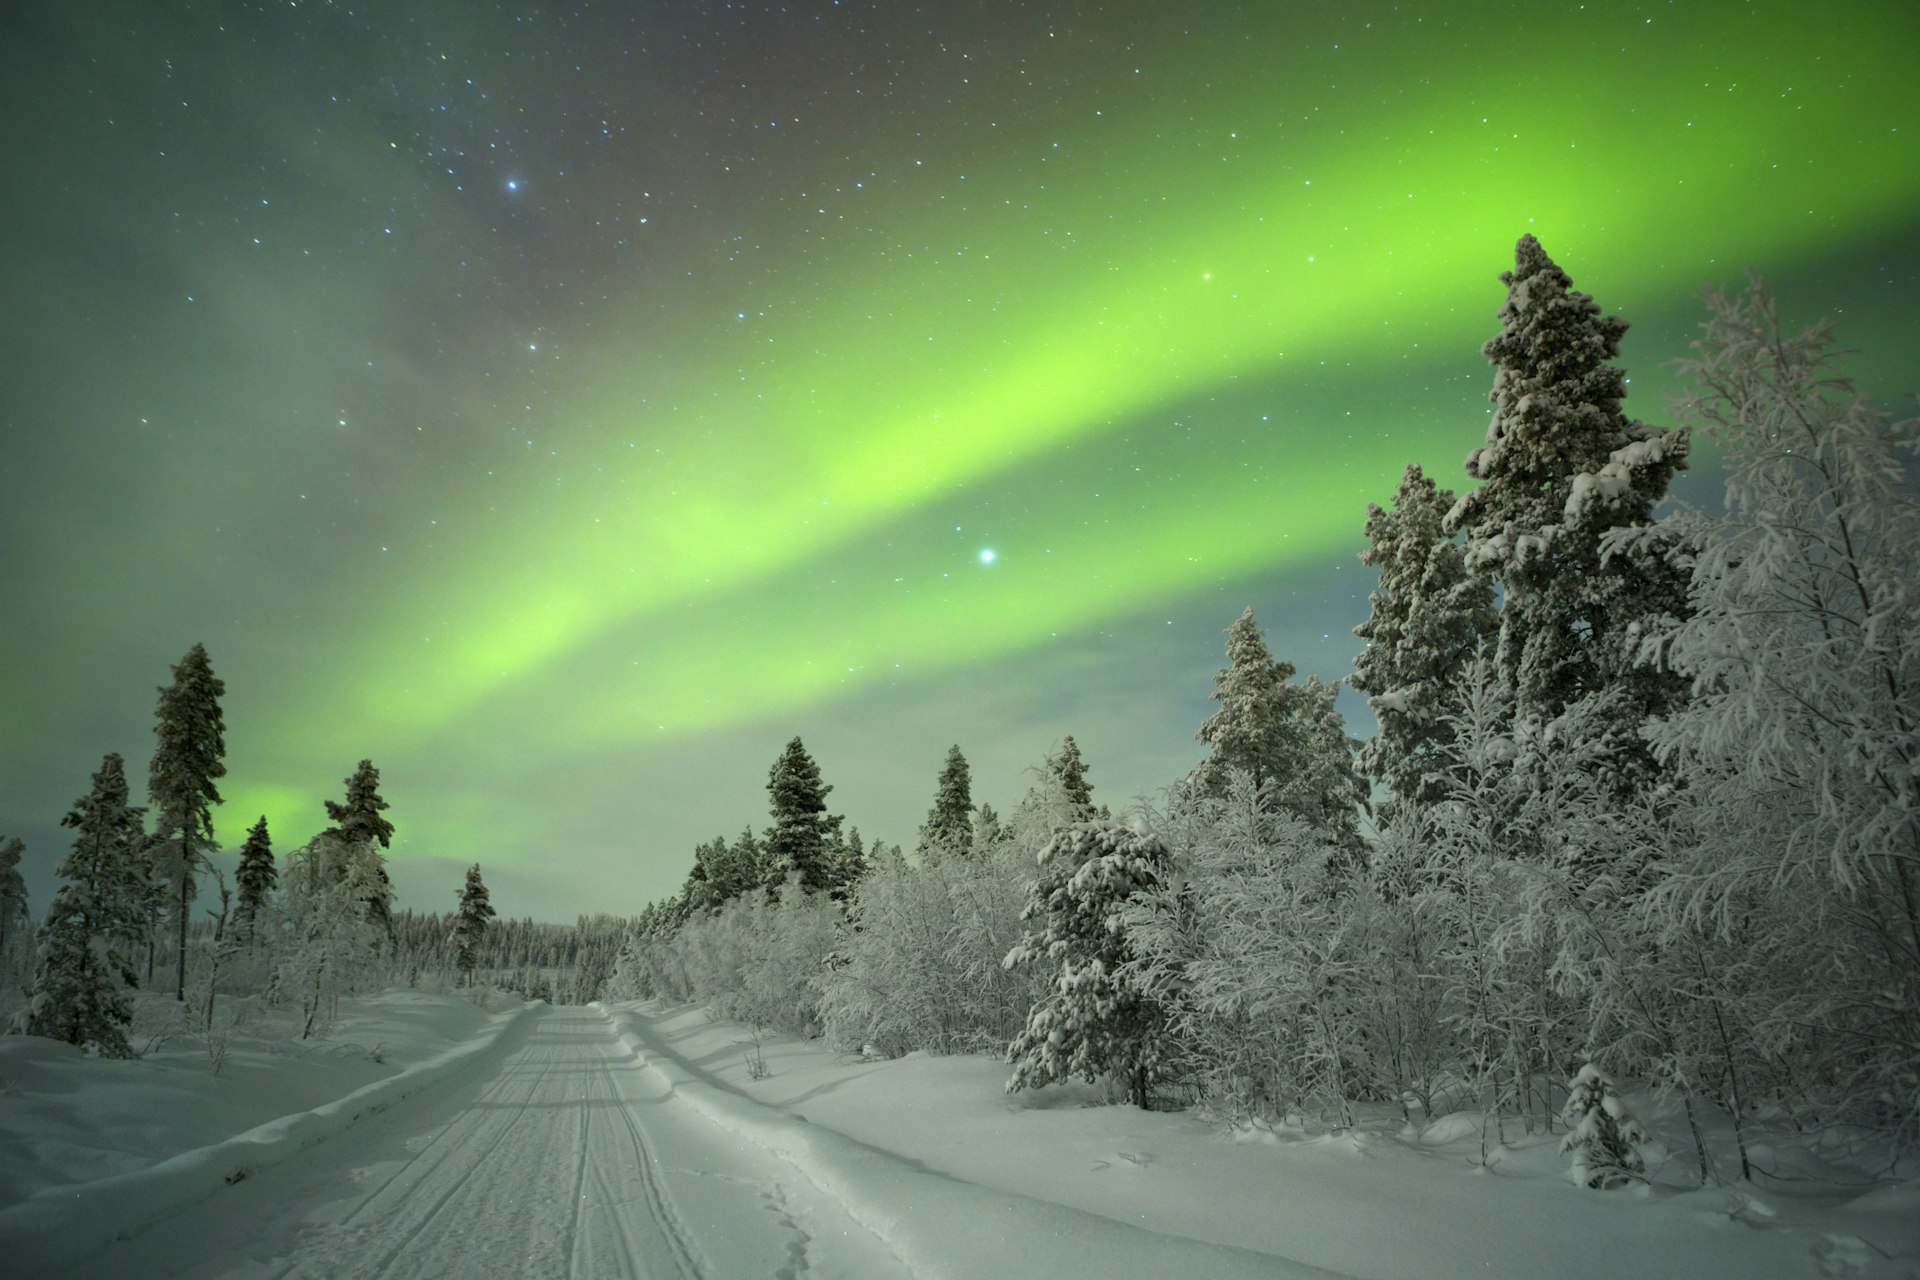 A green light sweeps across the sky above a snow-covered forest in Finnish Lapland